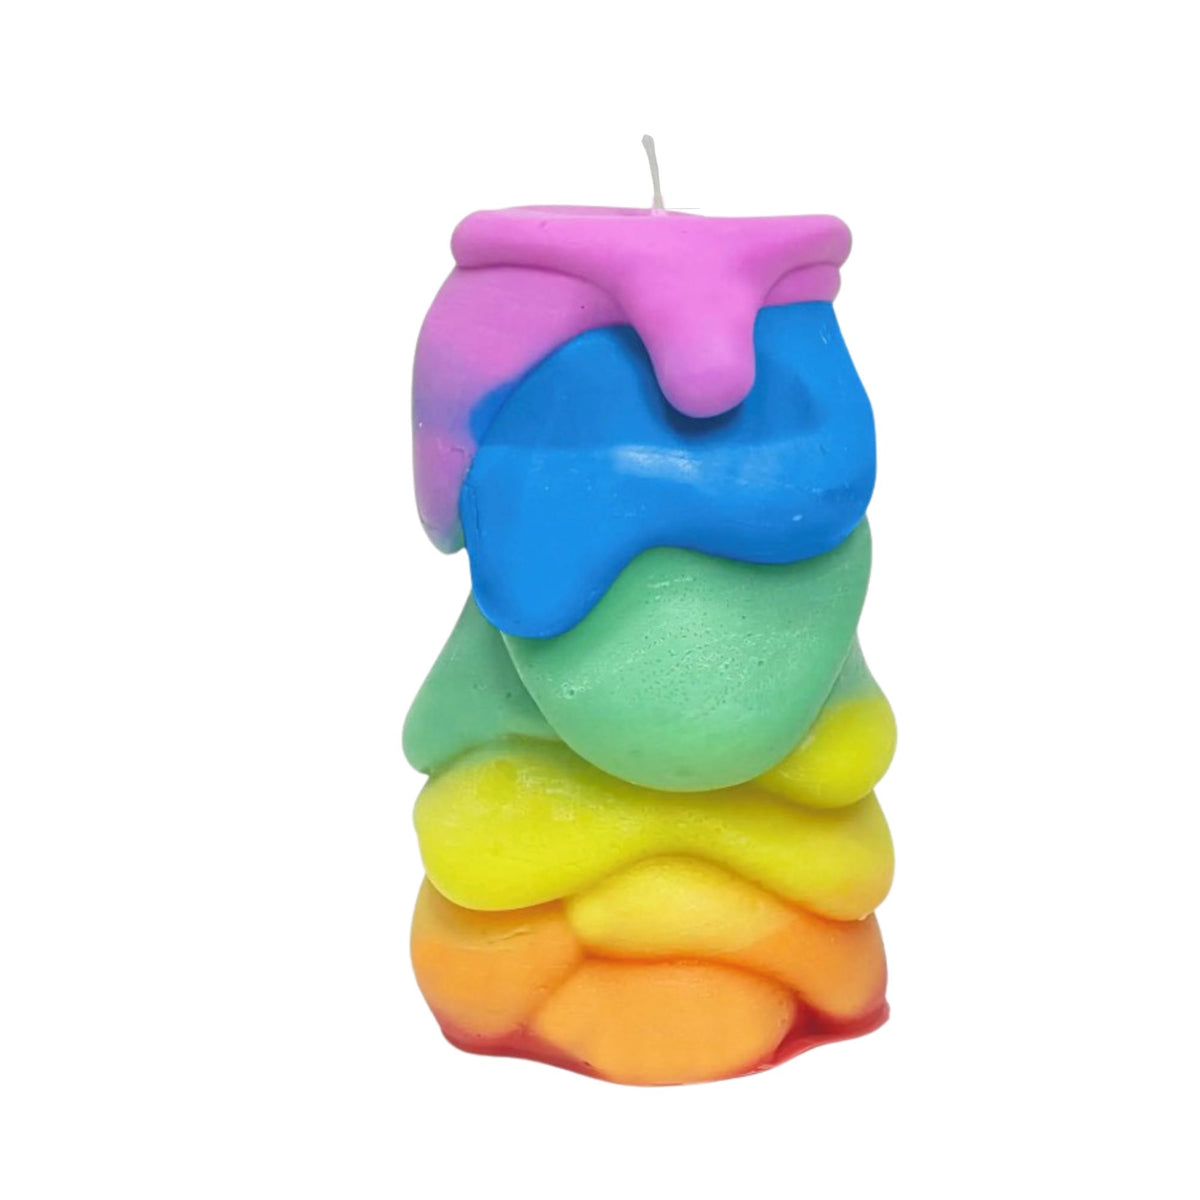 Dripping Candles - Large